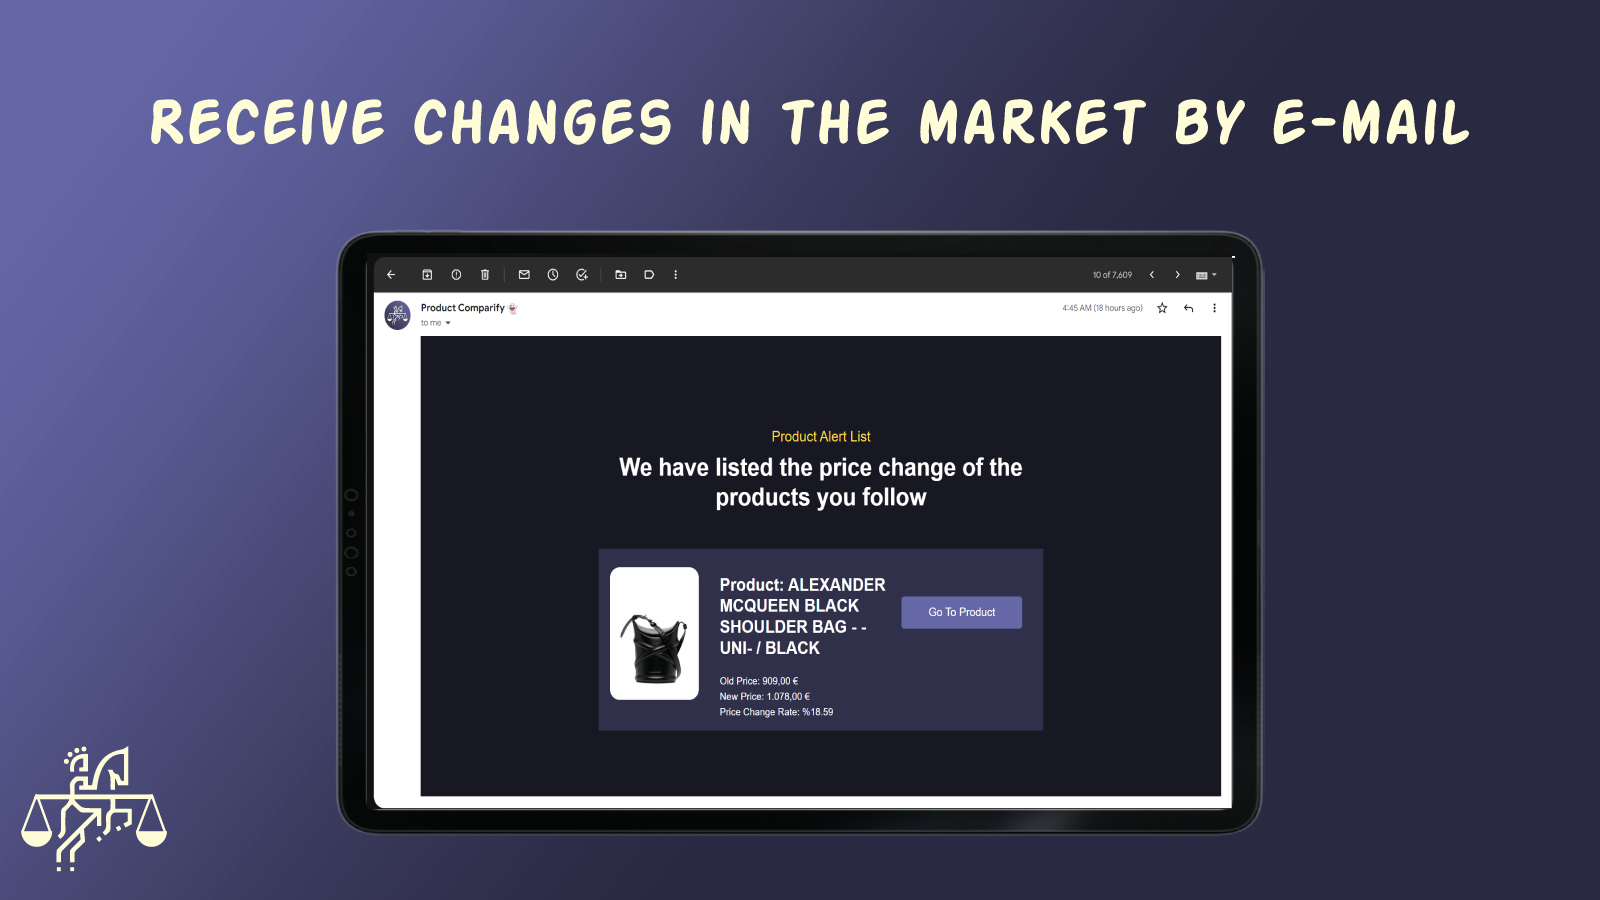 Receive changes in the market by e-mail.